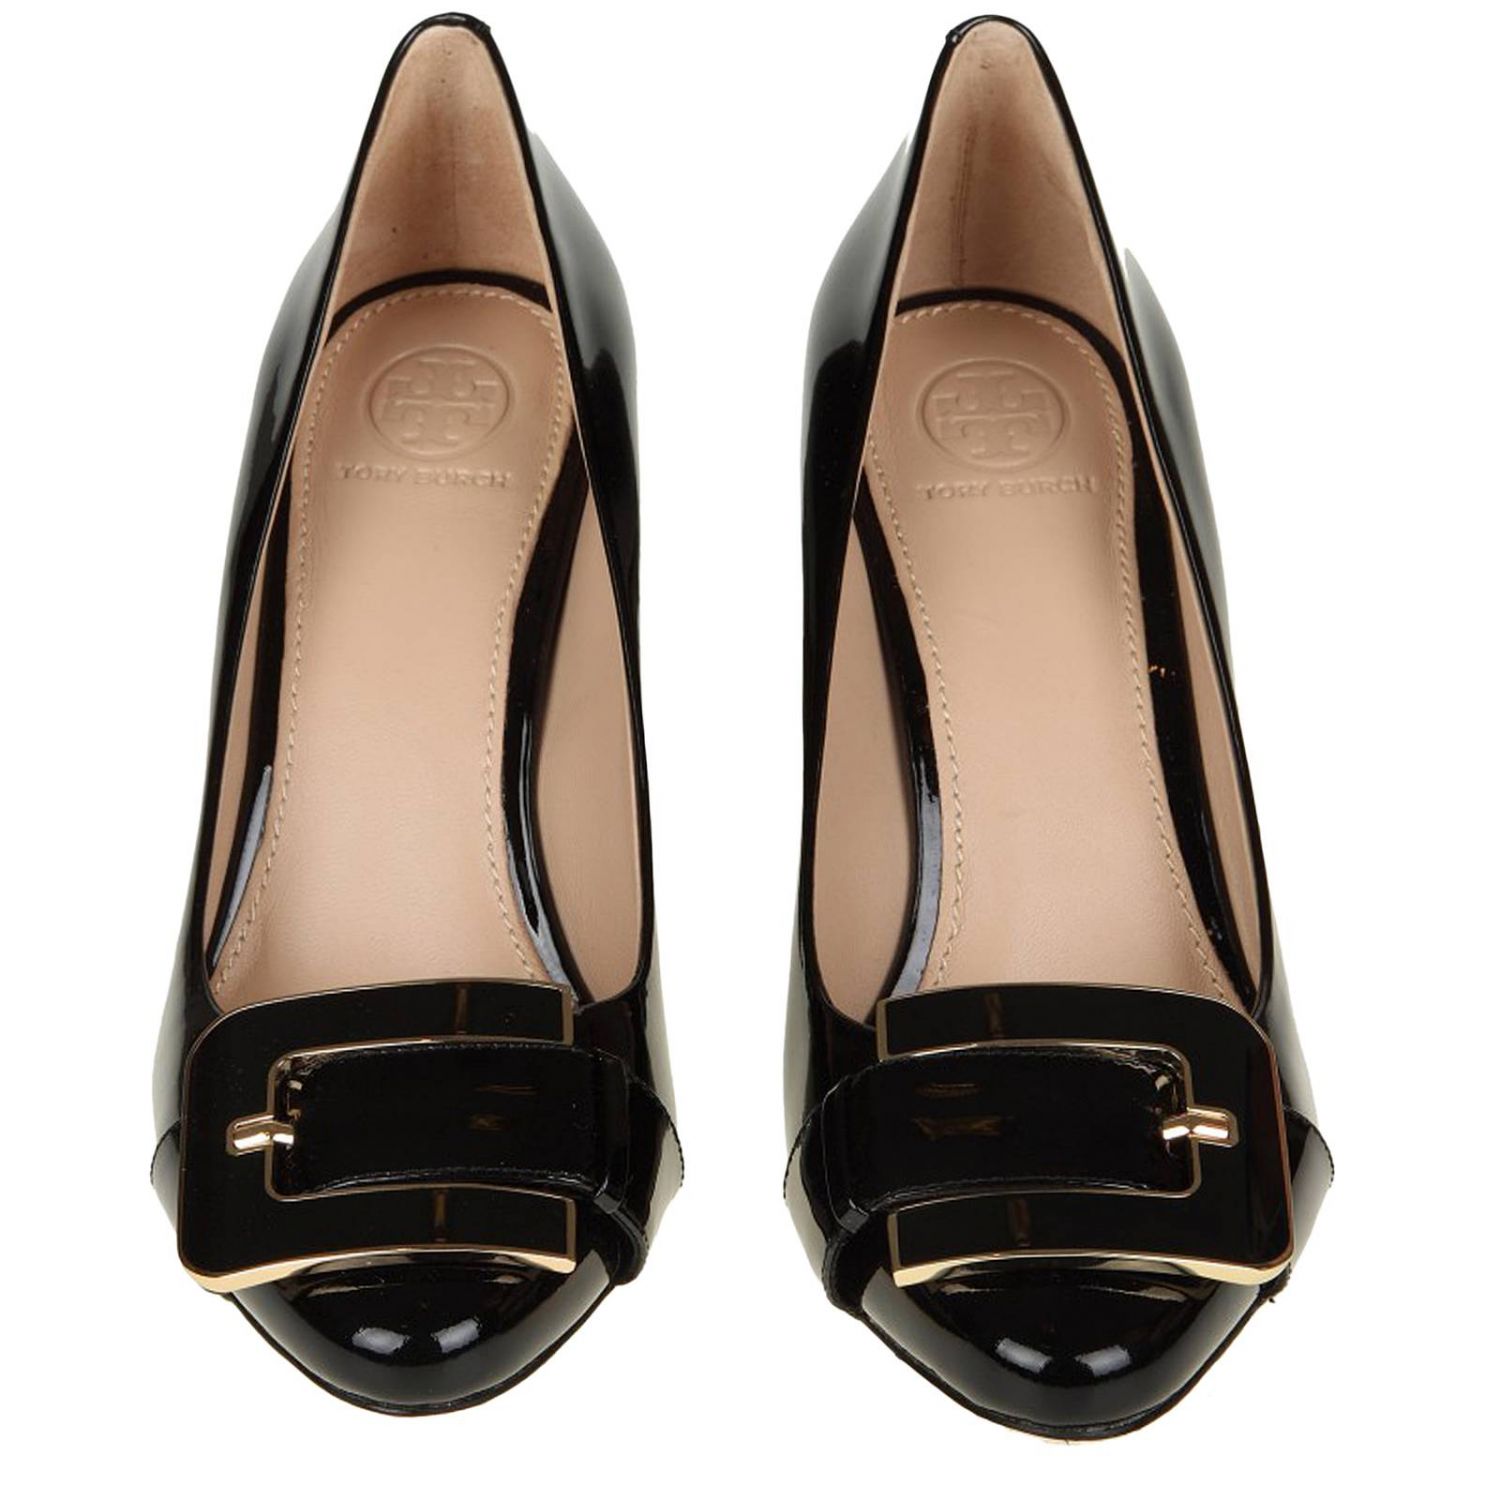 Tory Burch Outlet: Pumps women - Black | Pumps Tory Burch 38039 GIGLIO.COM